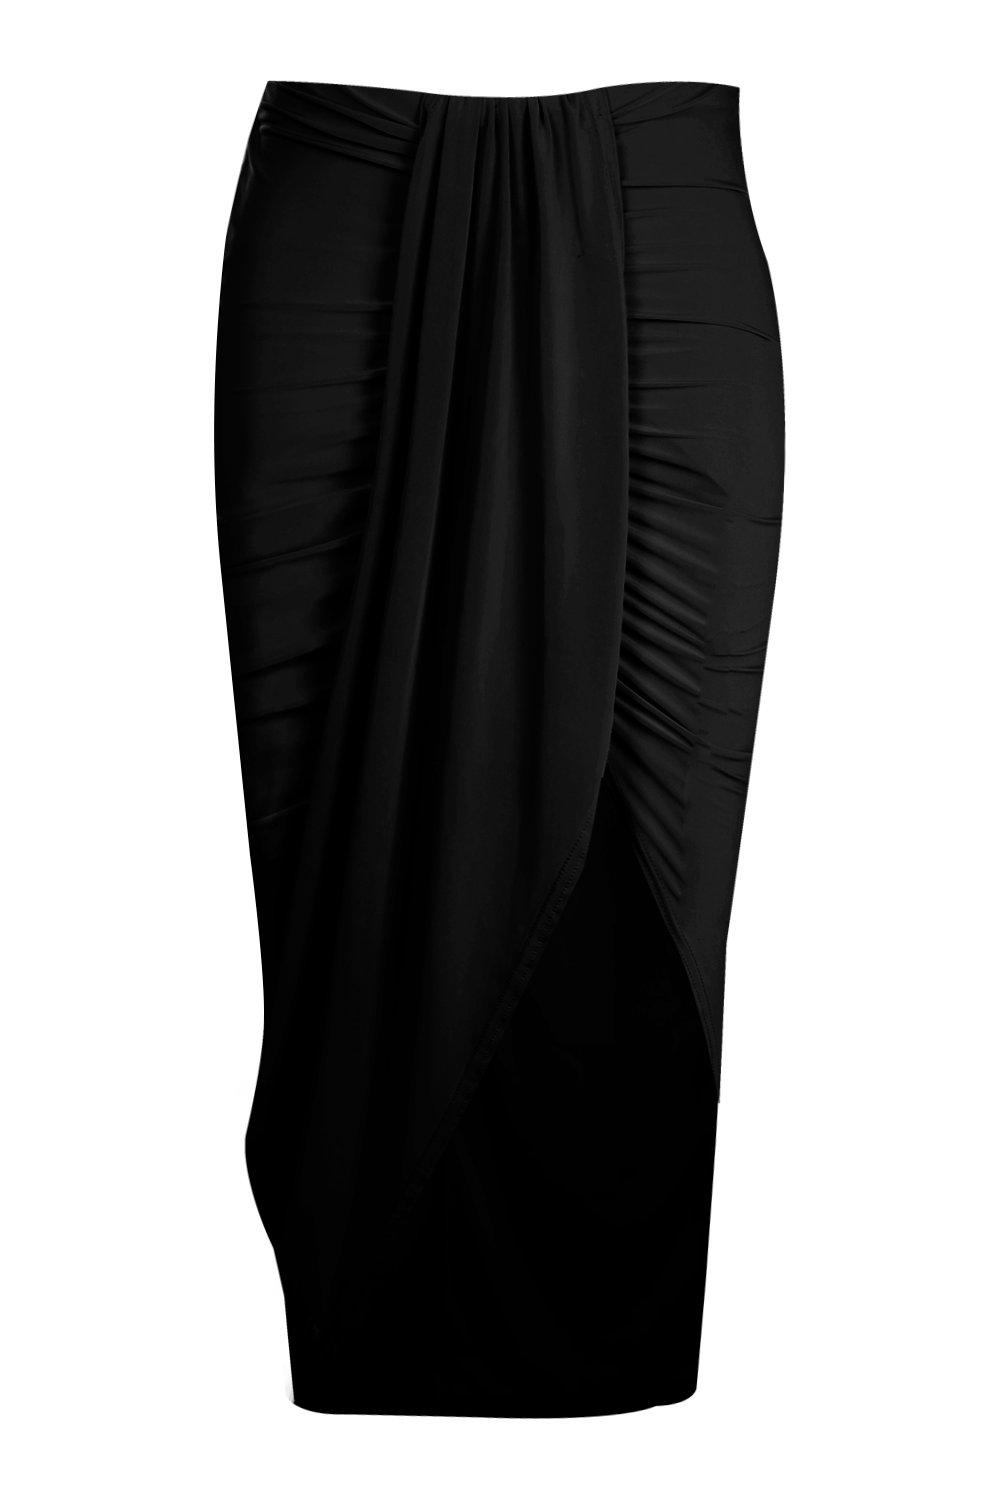 Boohoo Womens Plus Renee Ruched Wrap Front Maxi Skirt | eBay